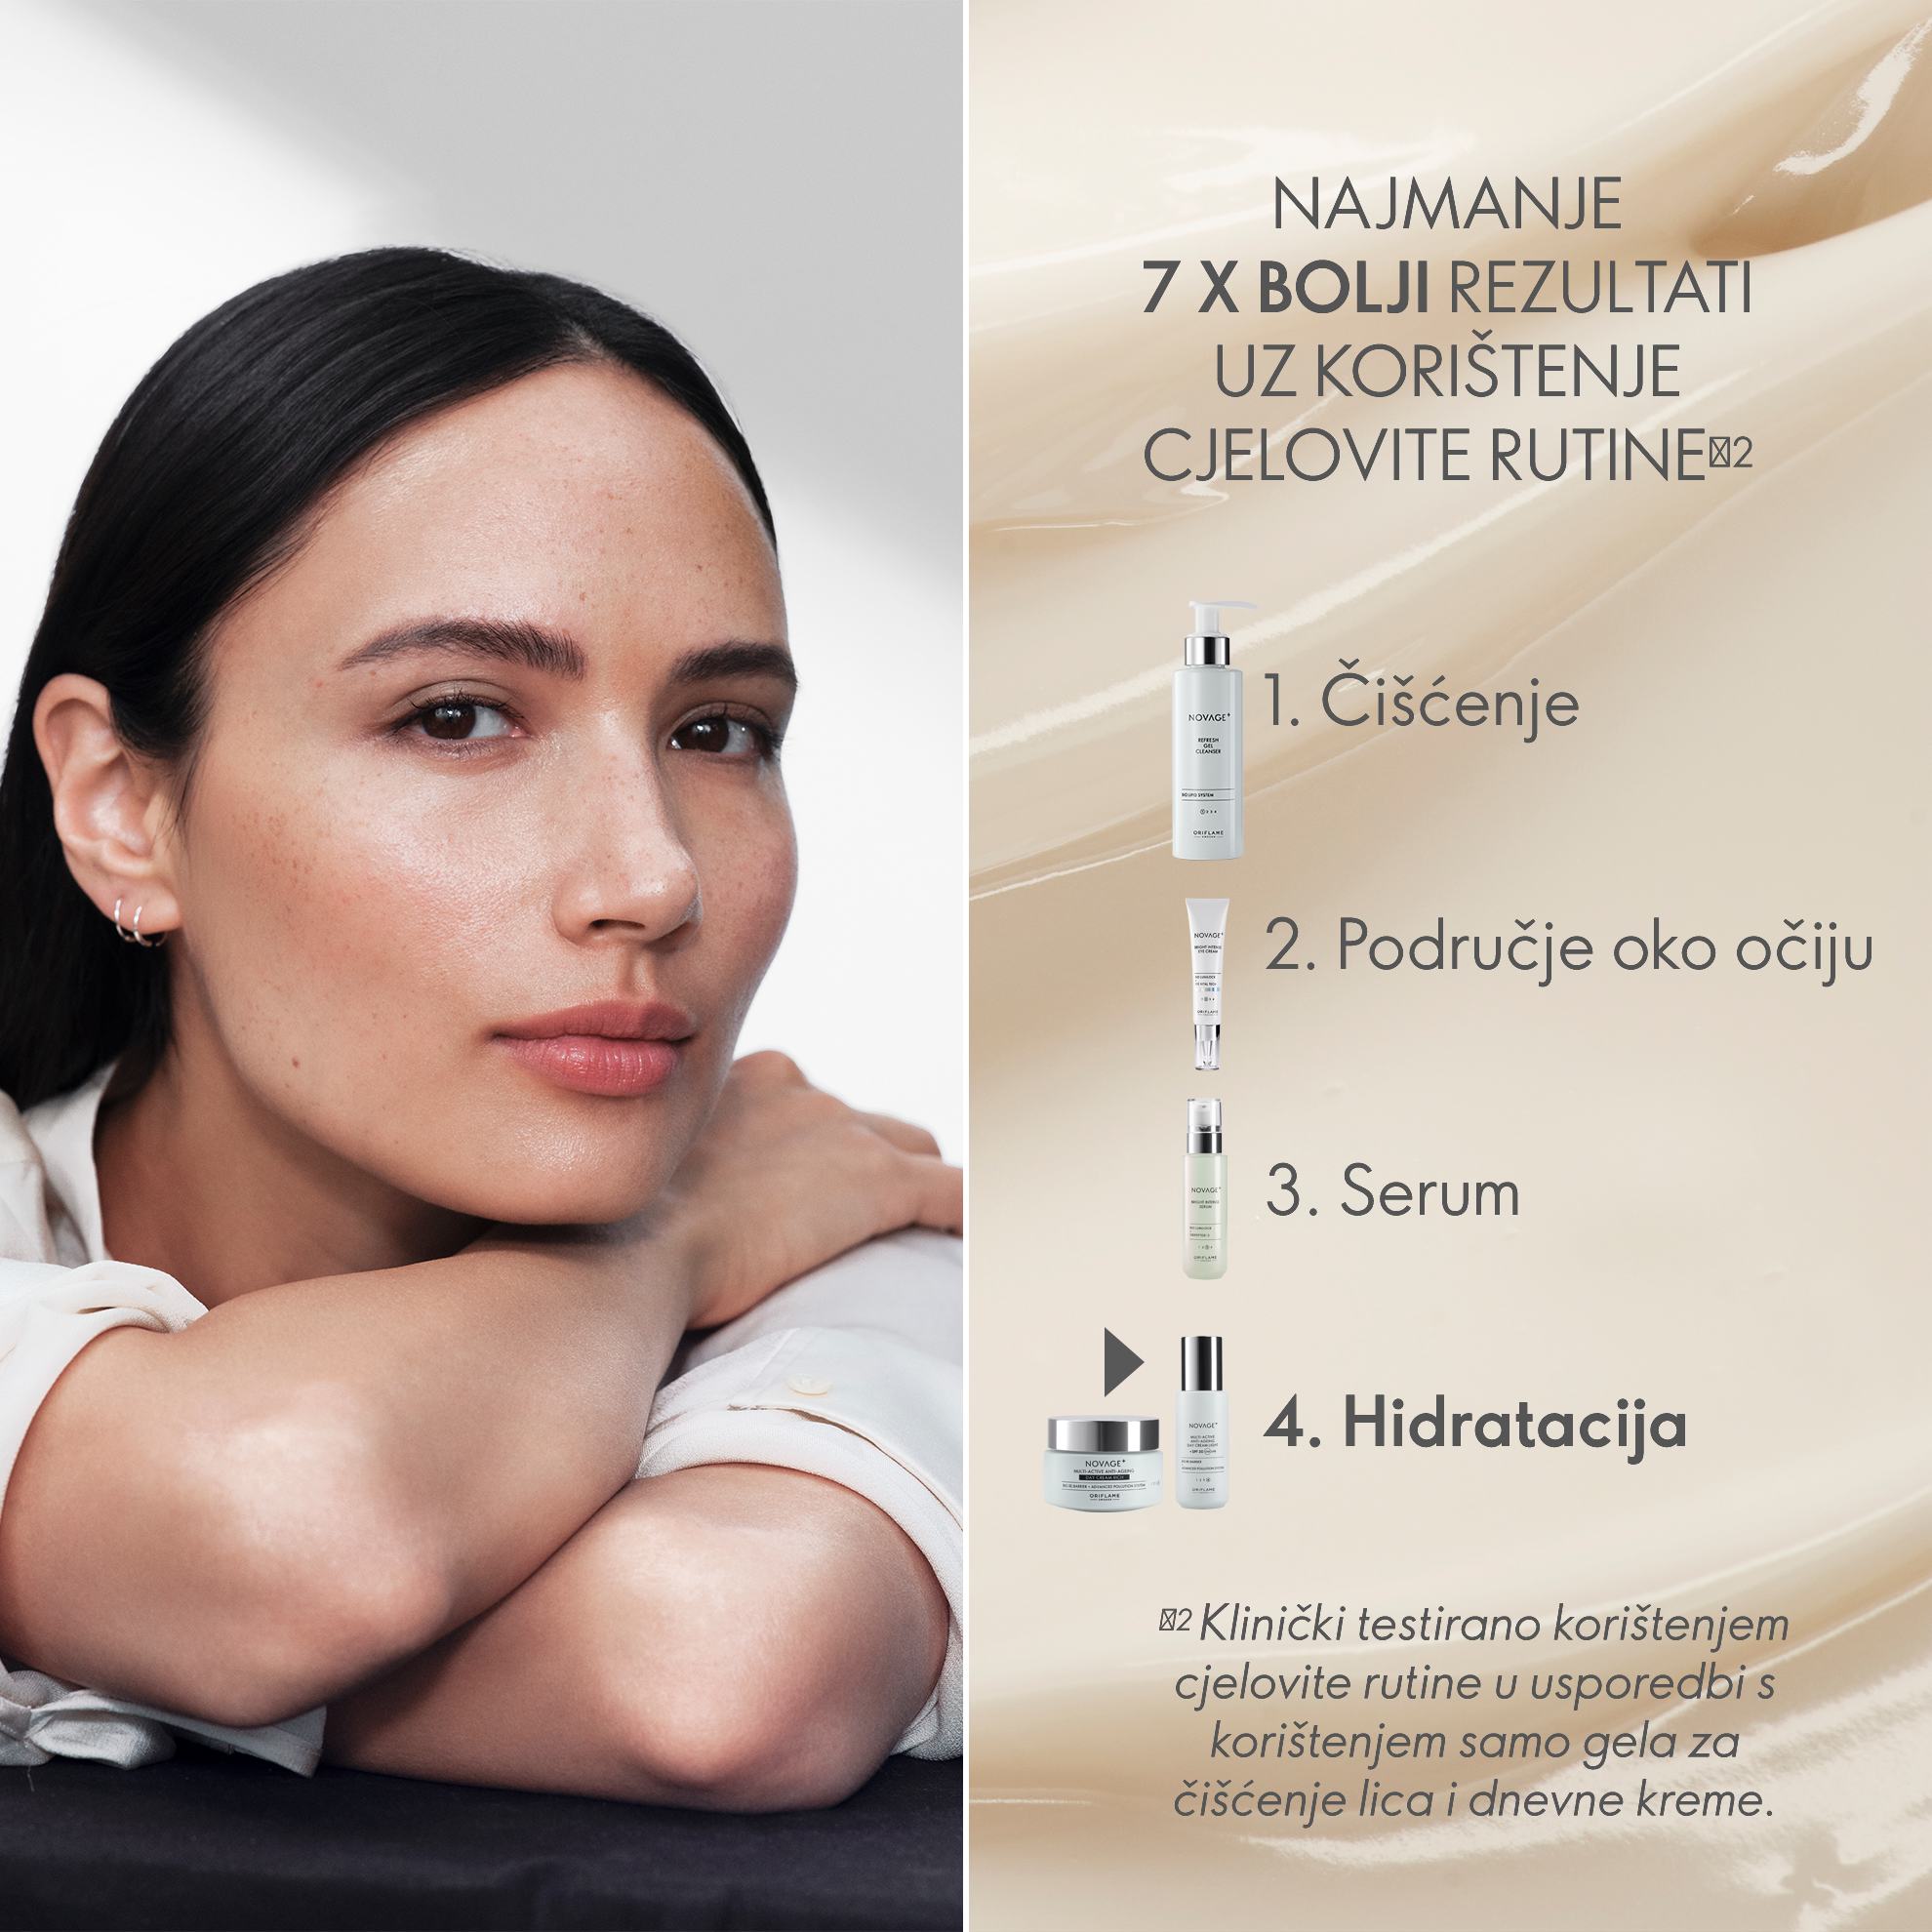 https://media-cdn.oriflame.com/productImage?externalMediaId=product-management-media%2fProducts%2f41047%2fHR%2f41047_5.png&id=17556491&version=1